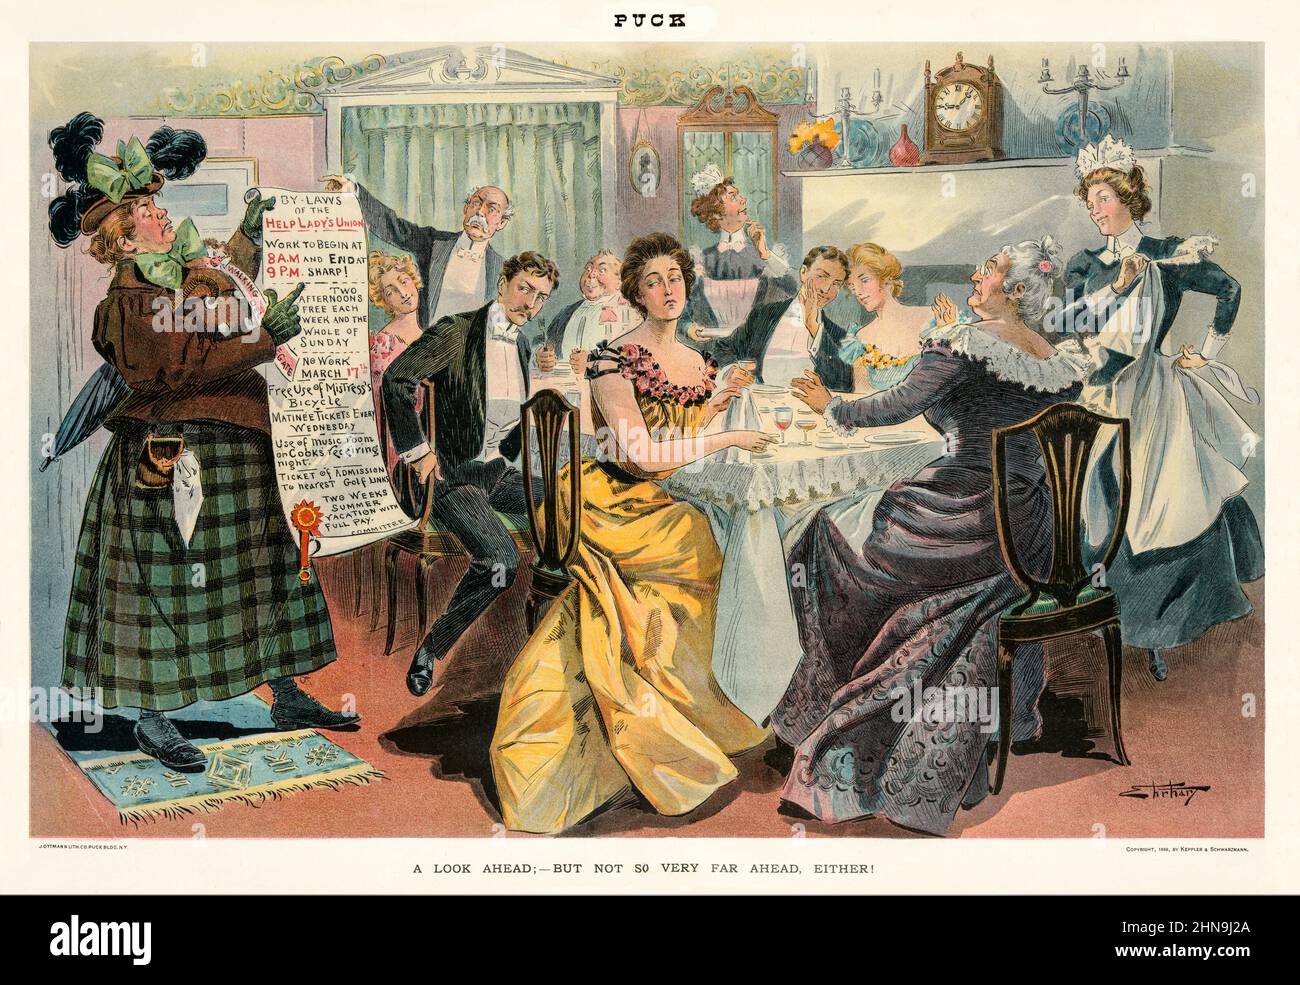 A late 19th century American Puck Magazine illustration showing  an Irish American woman labelled 'Walking Delegate' displaying the 'By-Laws of the Help Lady's Union' during a dinner party hosted by an elderly woman sitting at a table with her guests. Women domestics are seen removing their aprons, as a man in the background orders the 'Walking Delegate' to leave. Stock Photo